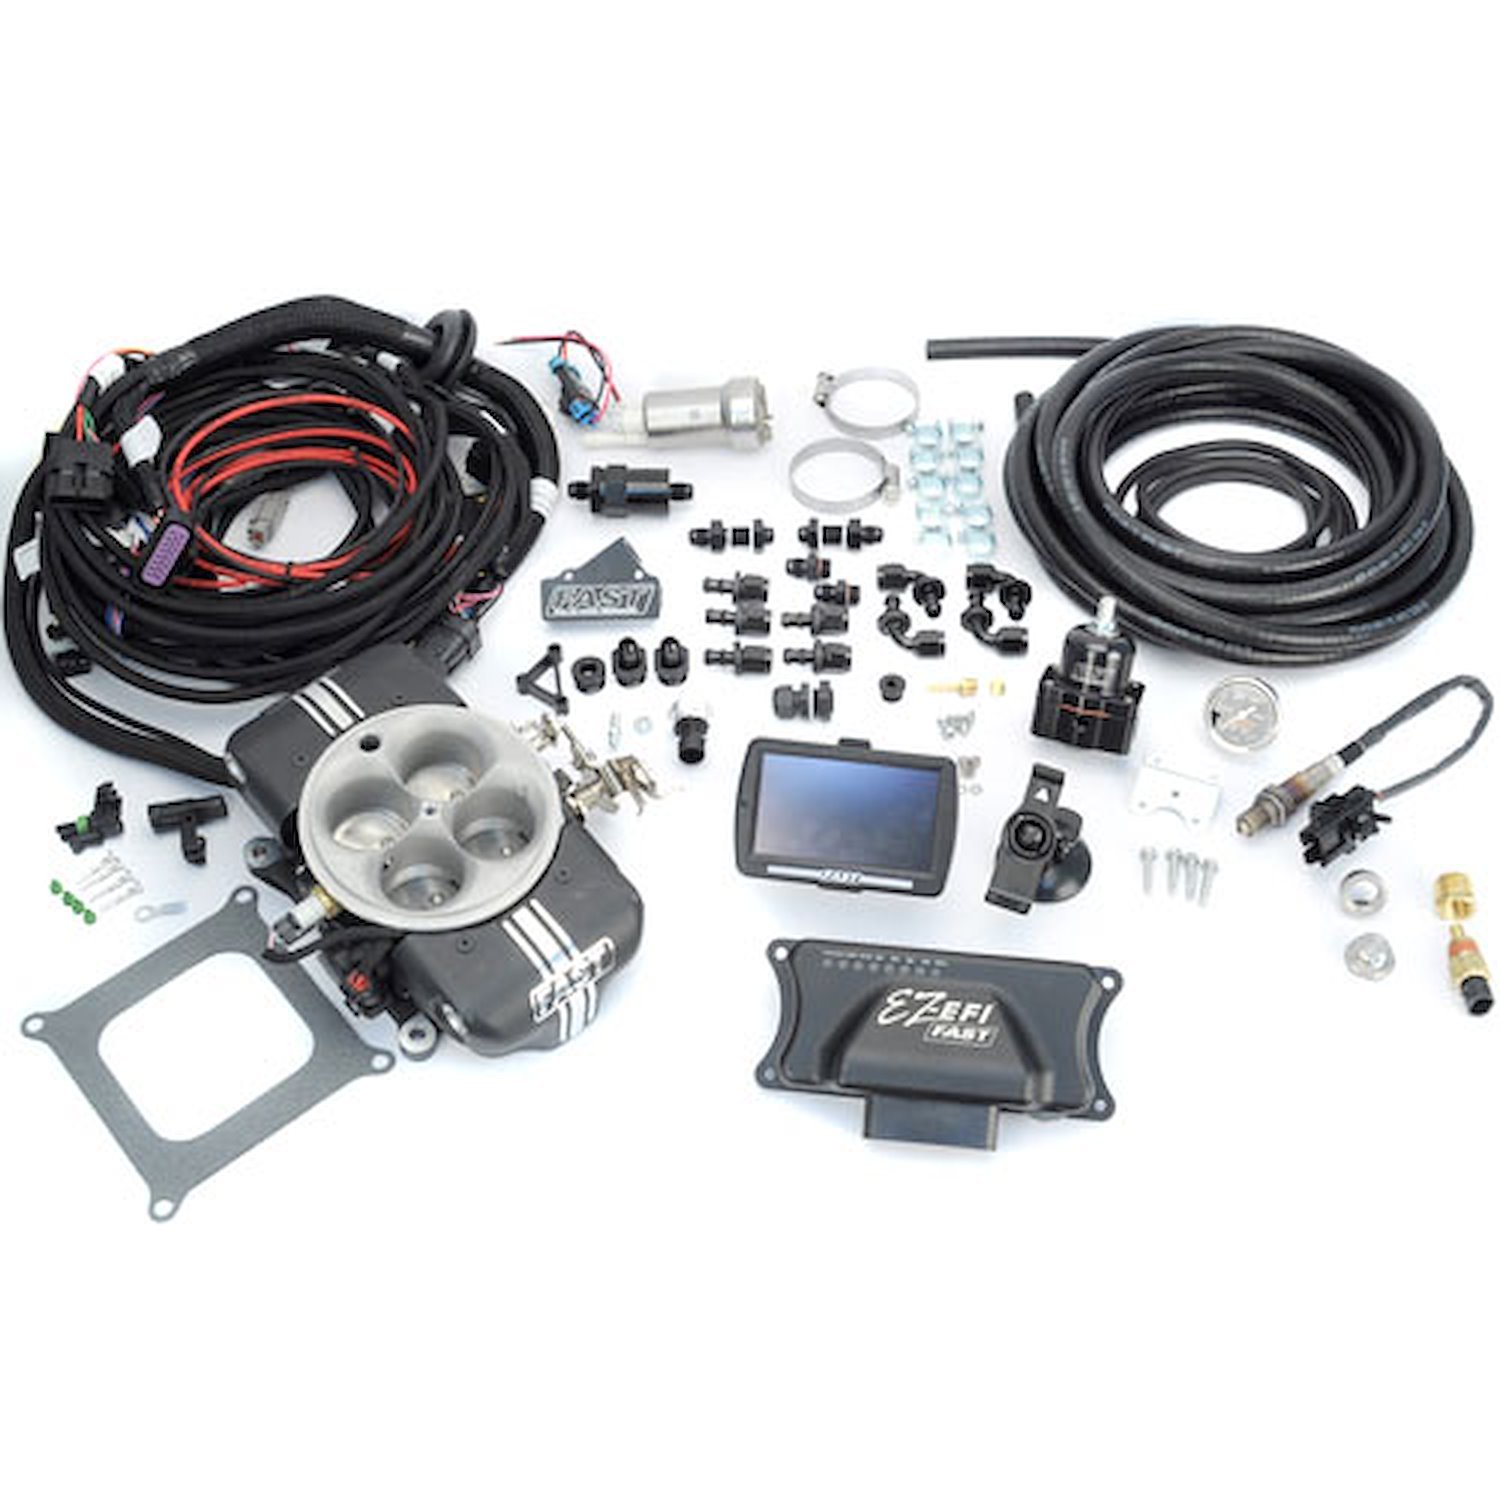 EZ-EFI 2.0 Self-Tuning Fuel Injection System Master Kit with In-Tank Fuel Pump